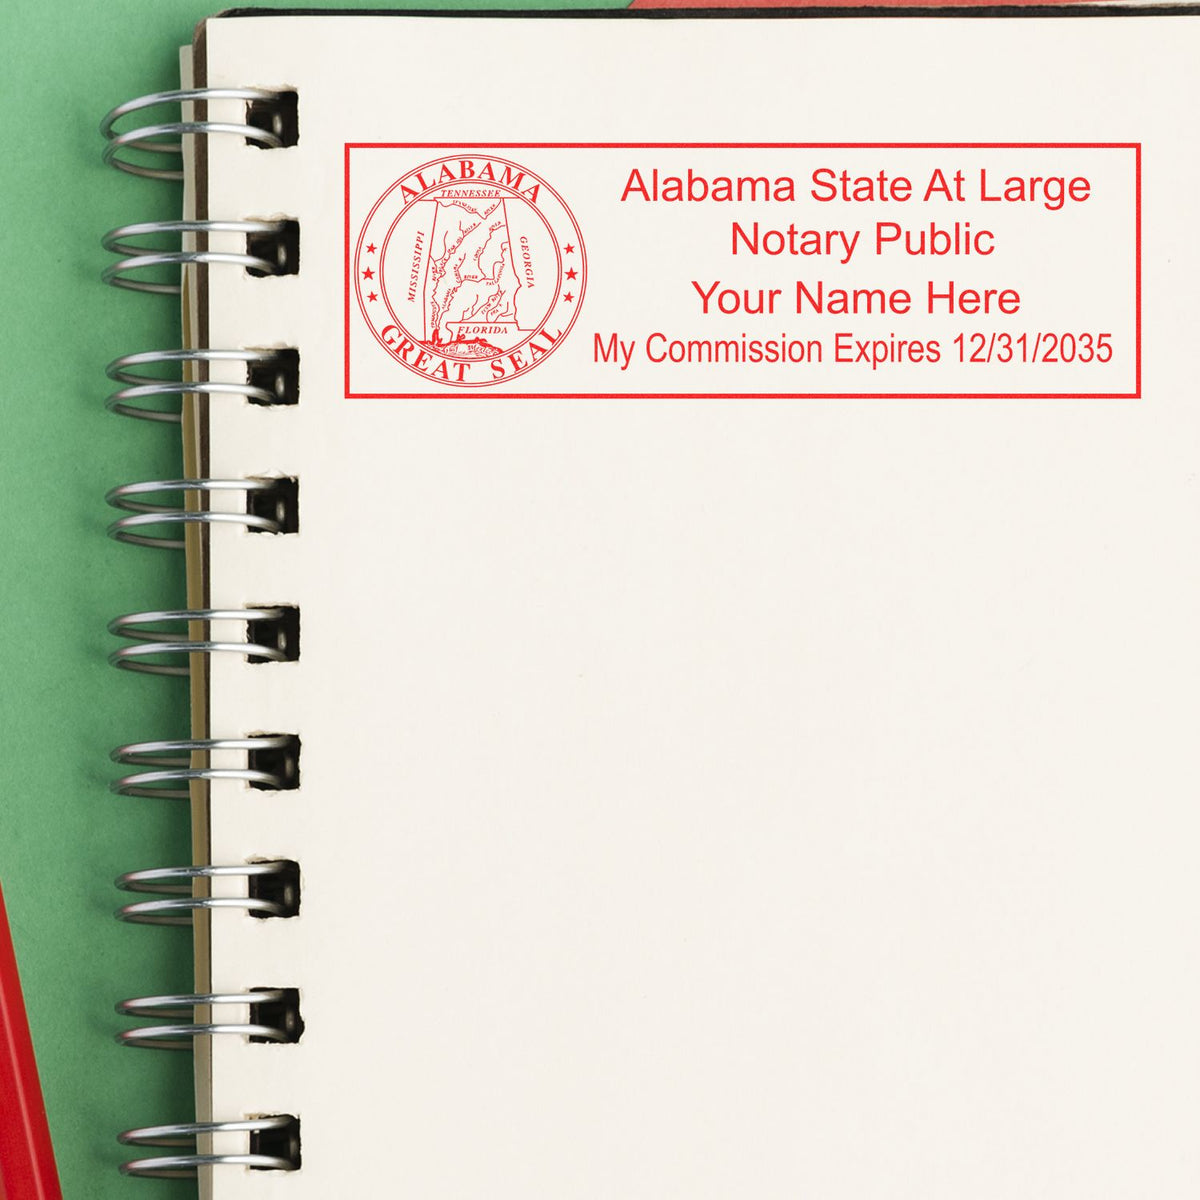 The Heavy-Duty Alabama Rectangular Notary Stamp stamp impression comes to life with a crisp, detailed photo on paper - showcasing true professional quality.